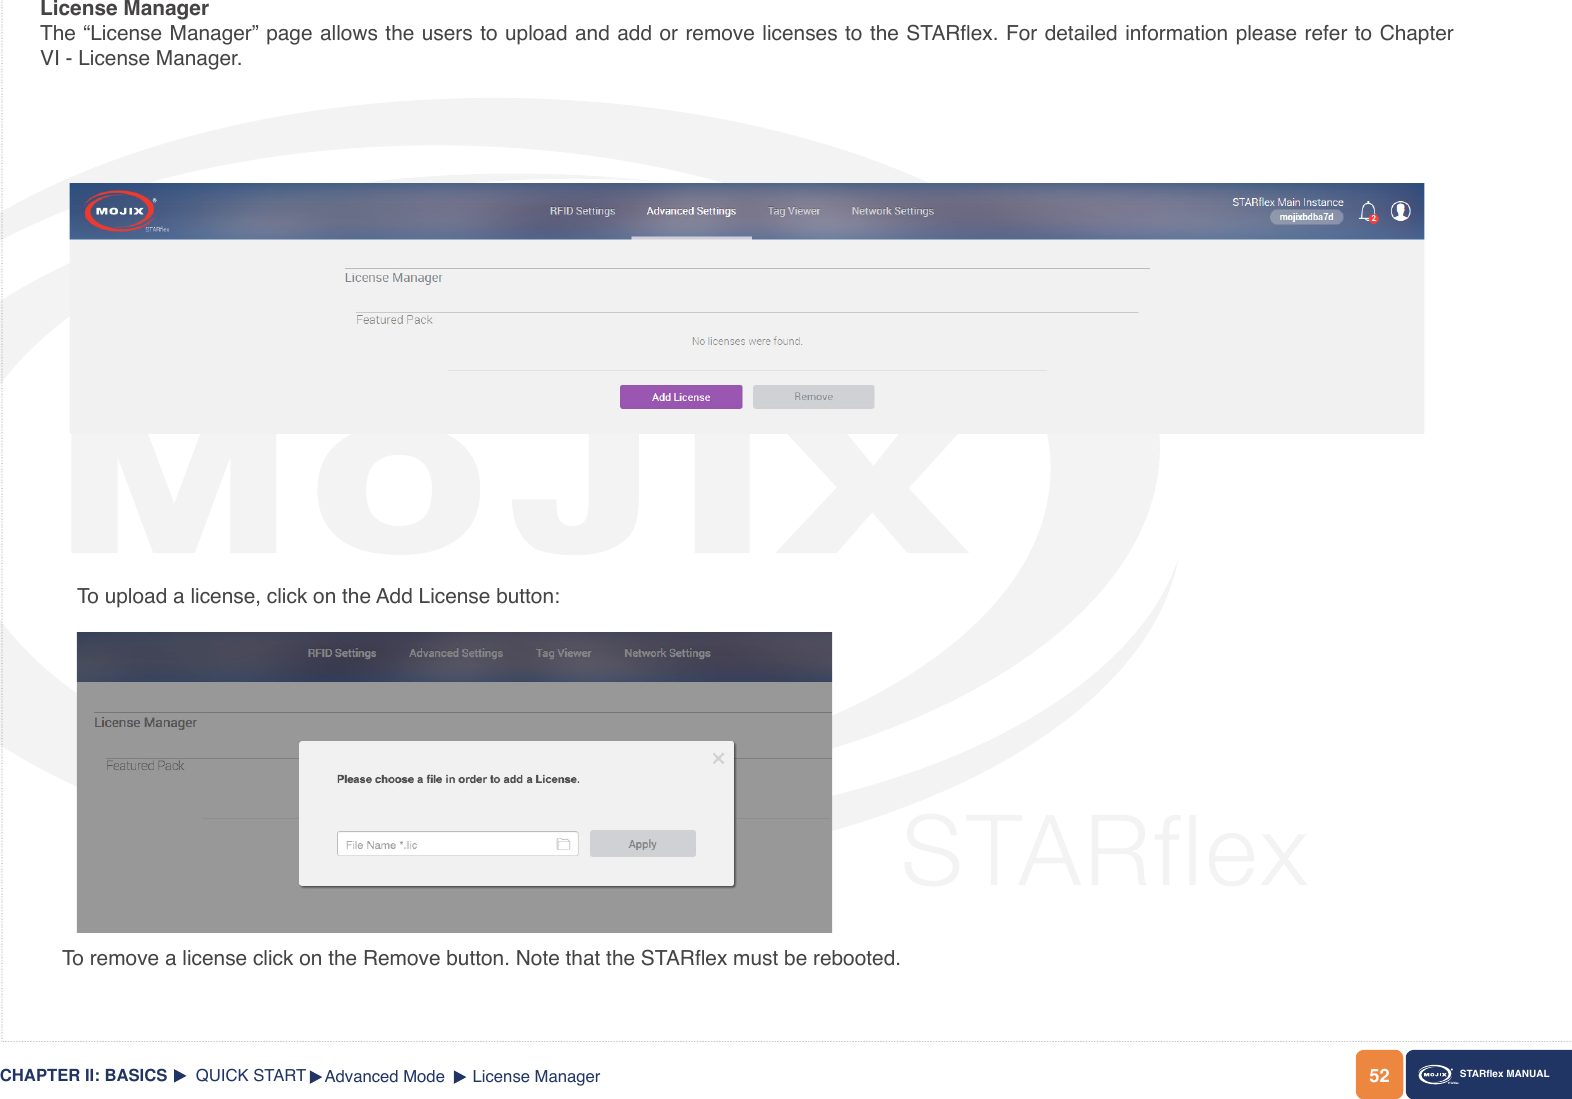 52CHAPTER II: BASICS STARex MANUALTo upload a license, click on the Add License button:To remove a license click on the Remove button. Note that the STARex must be rebooted.QUICK STARTLicense ManagerThe “License Manager” page allows the users to upload and add or remove licenses to the STARex. For detailed information please refer to Chapter VI - License Manager.Advanced Mode License Manager